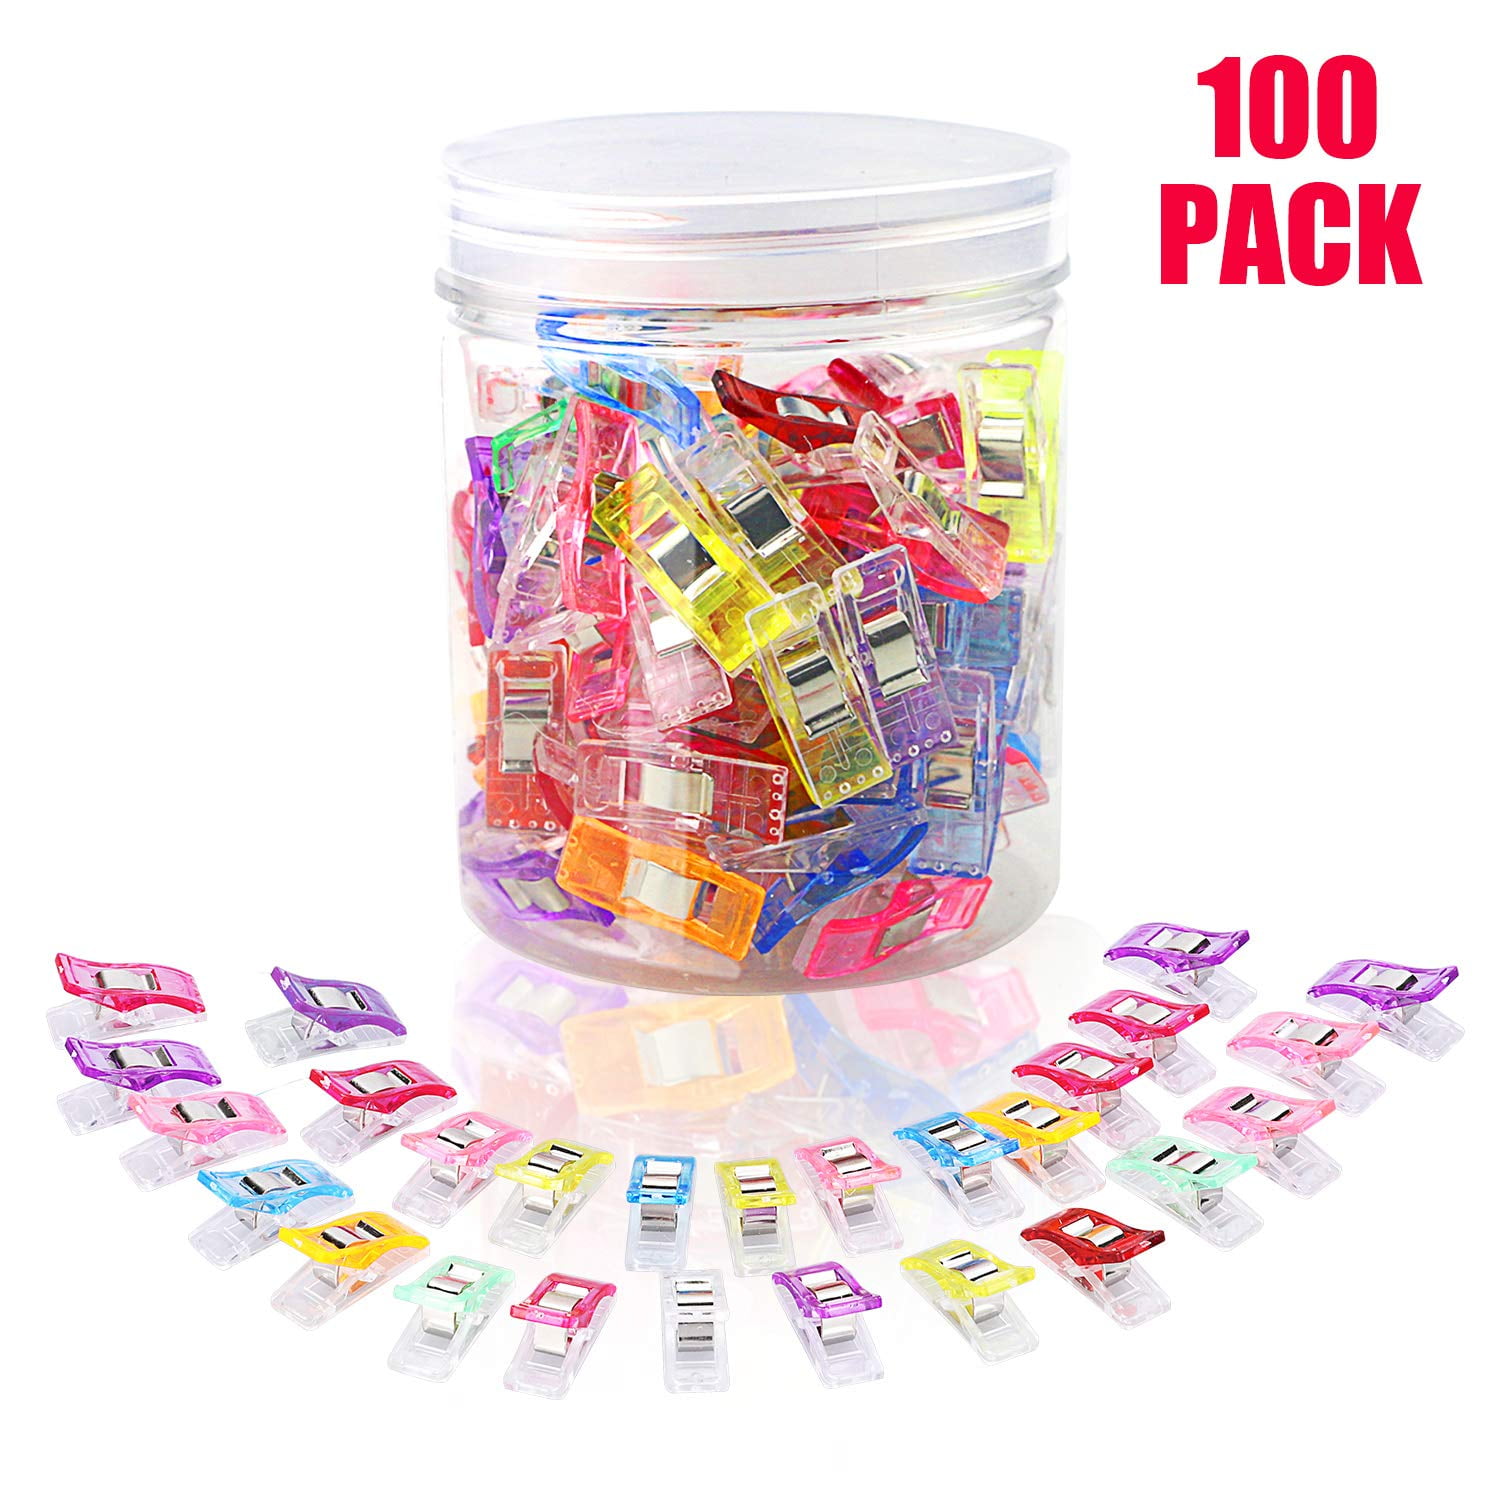 100pcs(90 Small+10 Large) Multipurpose Sewing Clips, All Purpose